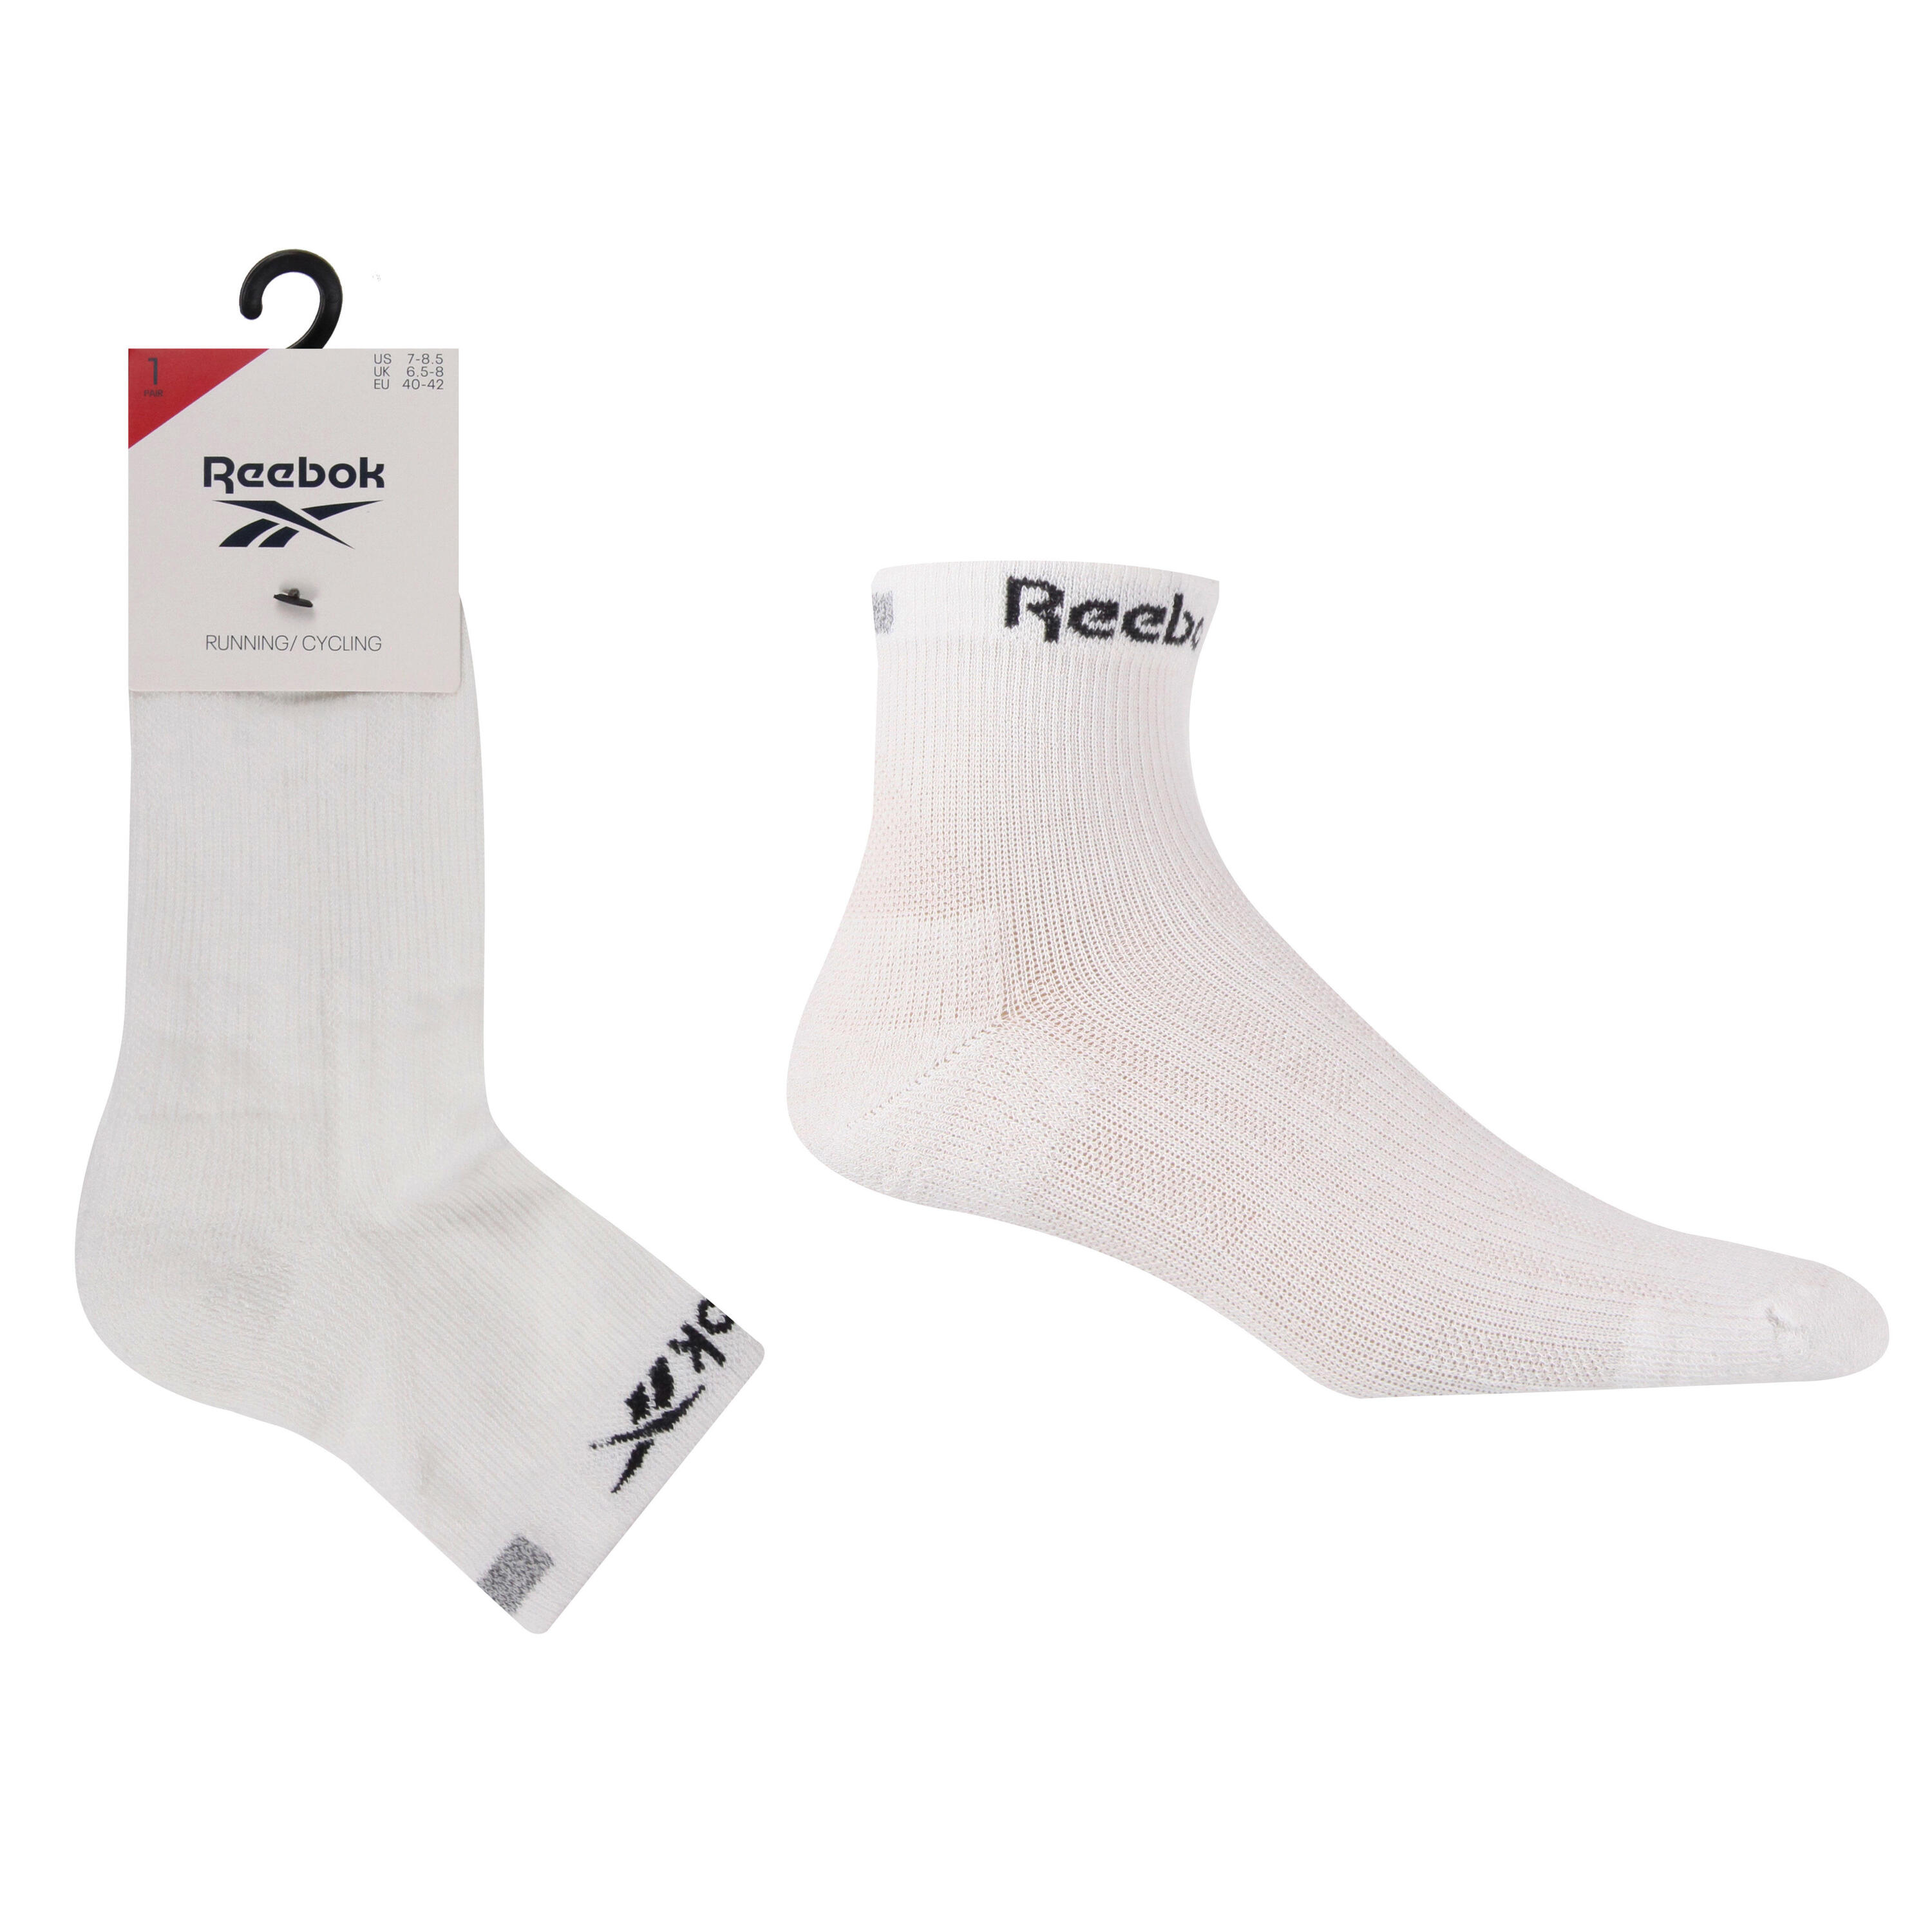 REEBOK 1 Pair Pack Running/Cycling Sports Socks With Mesh Top and Reflective Design